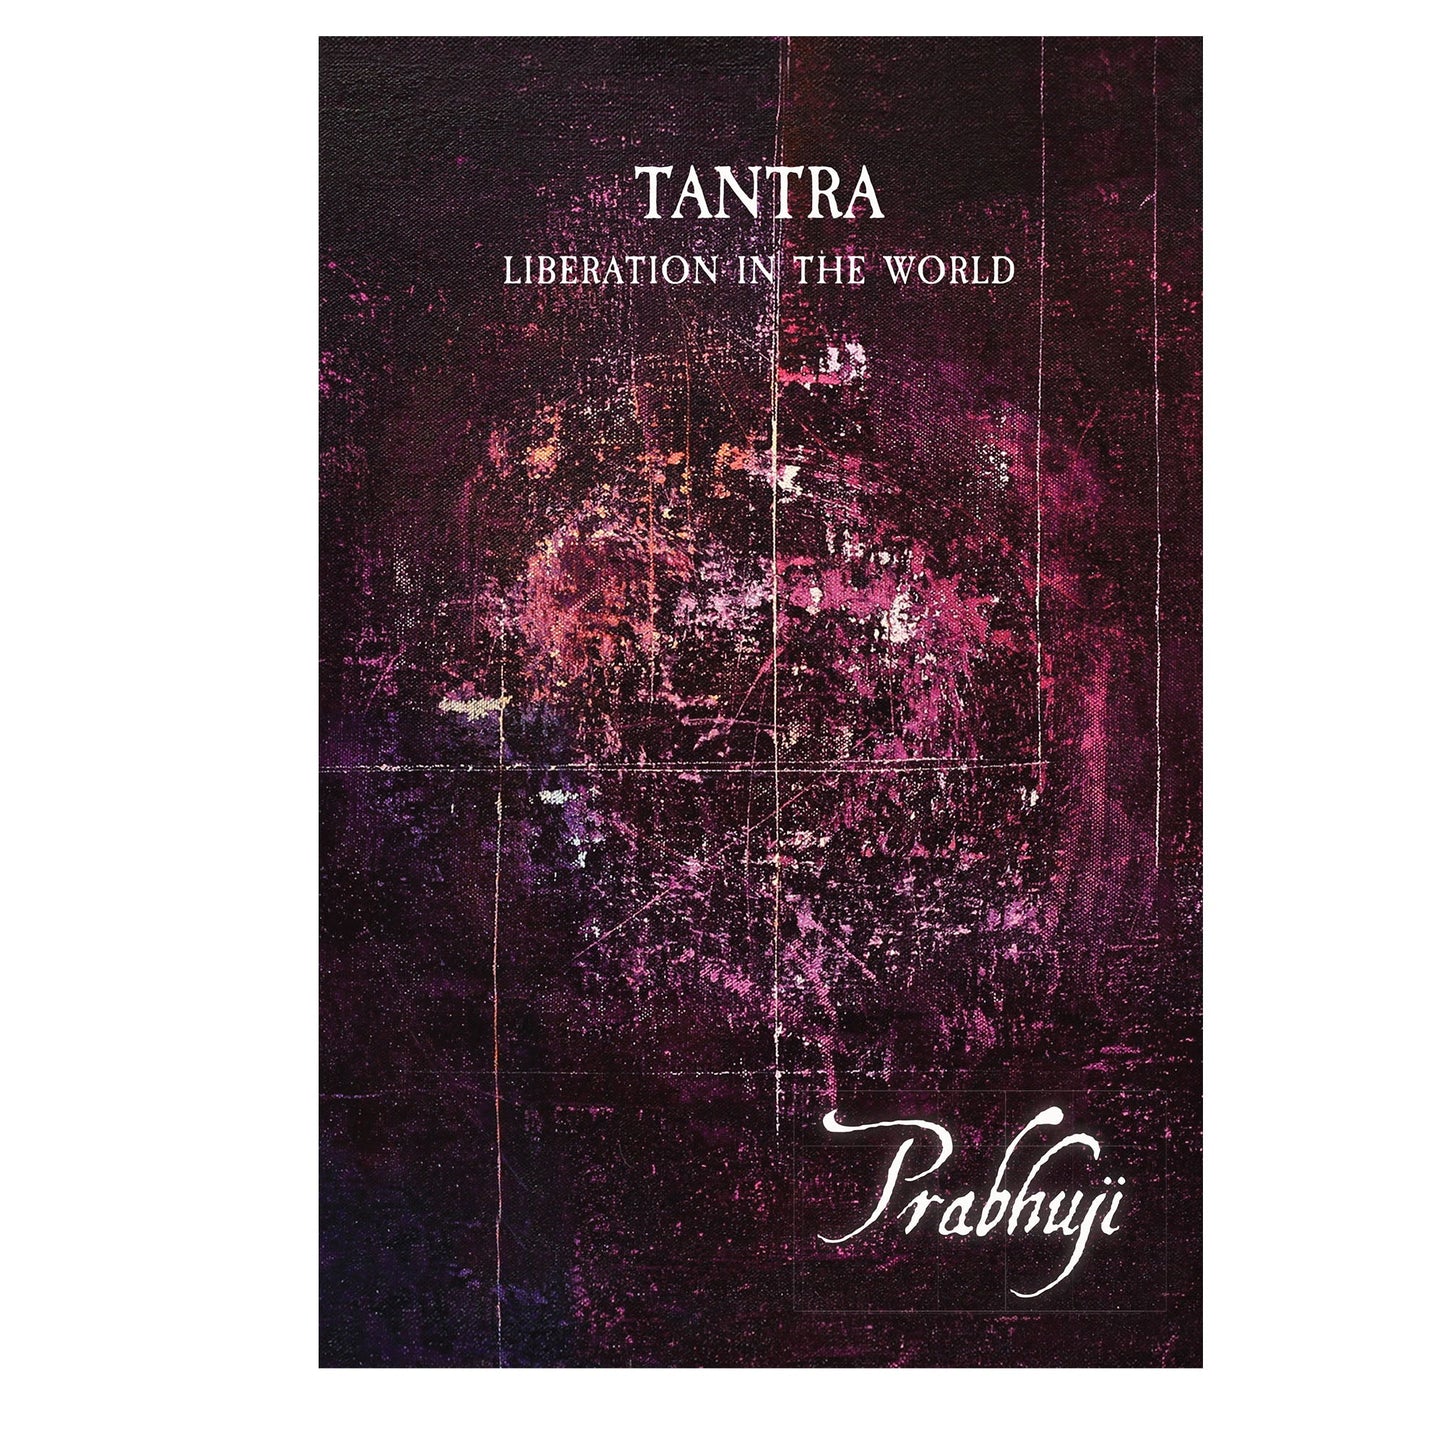 Book Tantra - Liberation in the world by Prabhuji (Paperback - English)